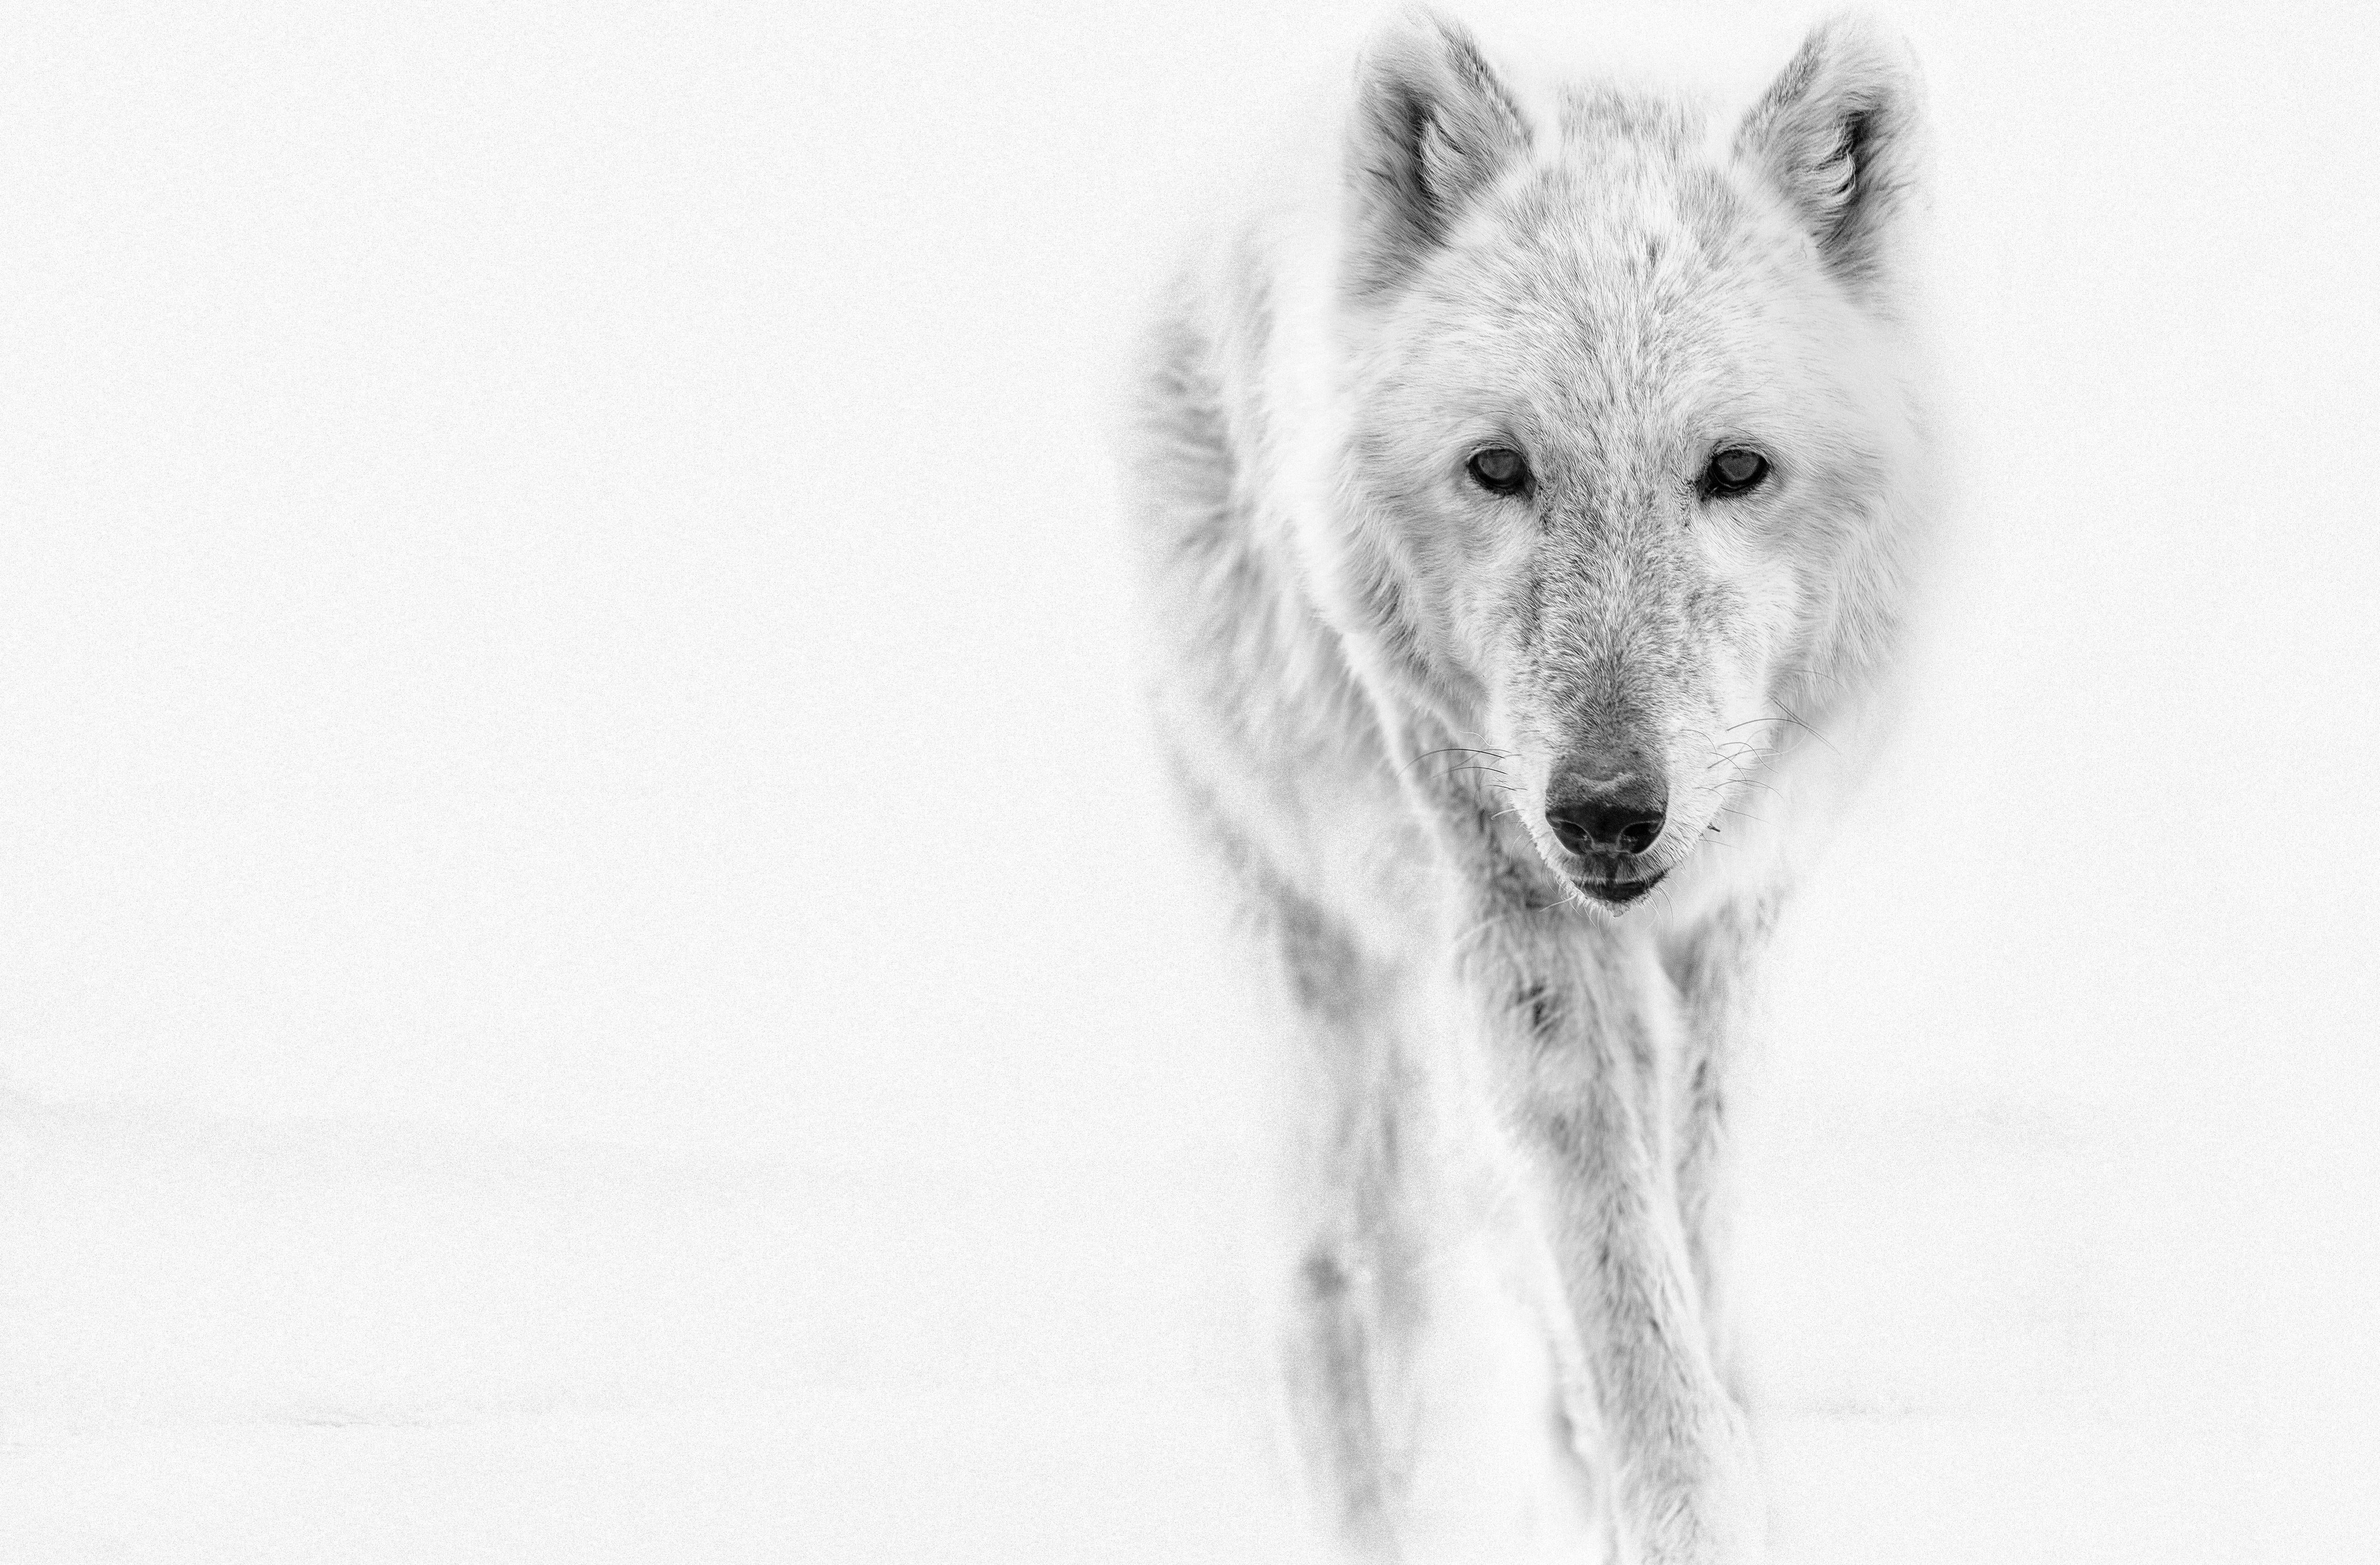 Shane Russeck Black and White Photograph - "Arctic Wolf" 40x60  Black & White Photography, Wolves Photograph Unsigned Print